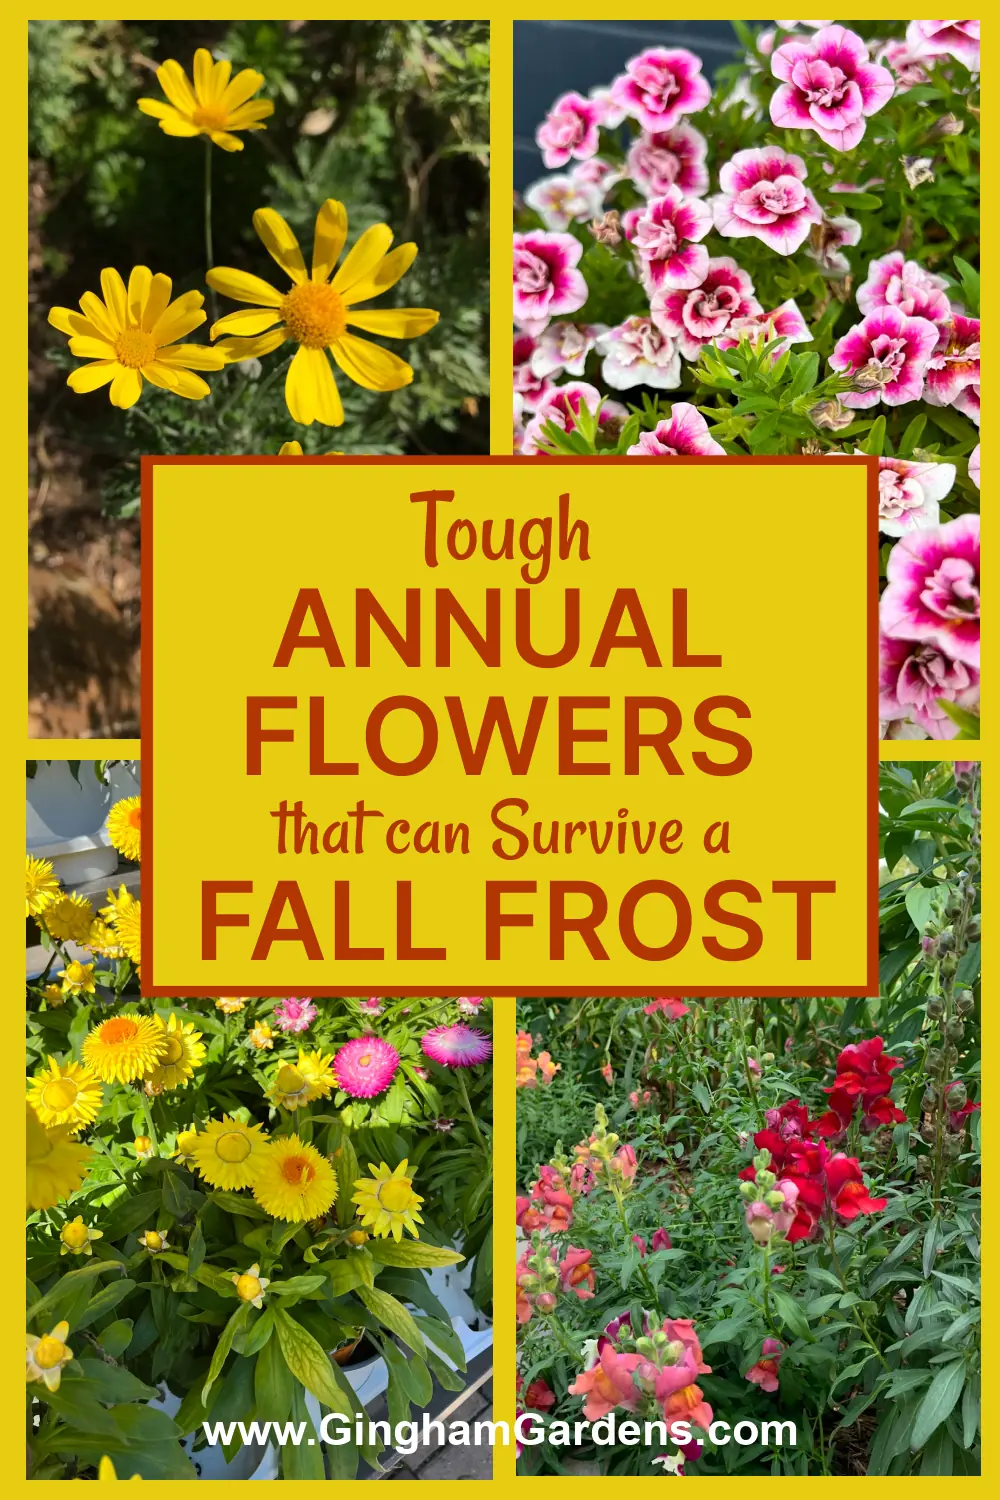 Images of colorful flowers with text overlay - Tough Annual Flowers that can Survive a Fall Frost